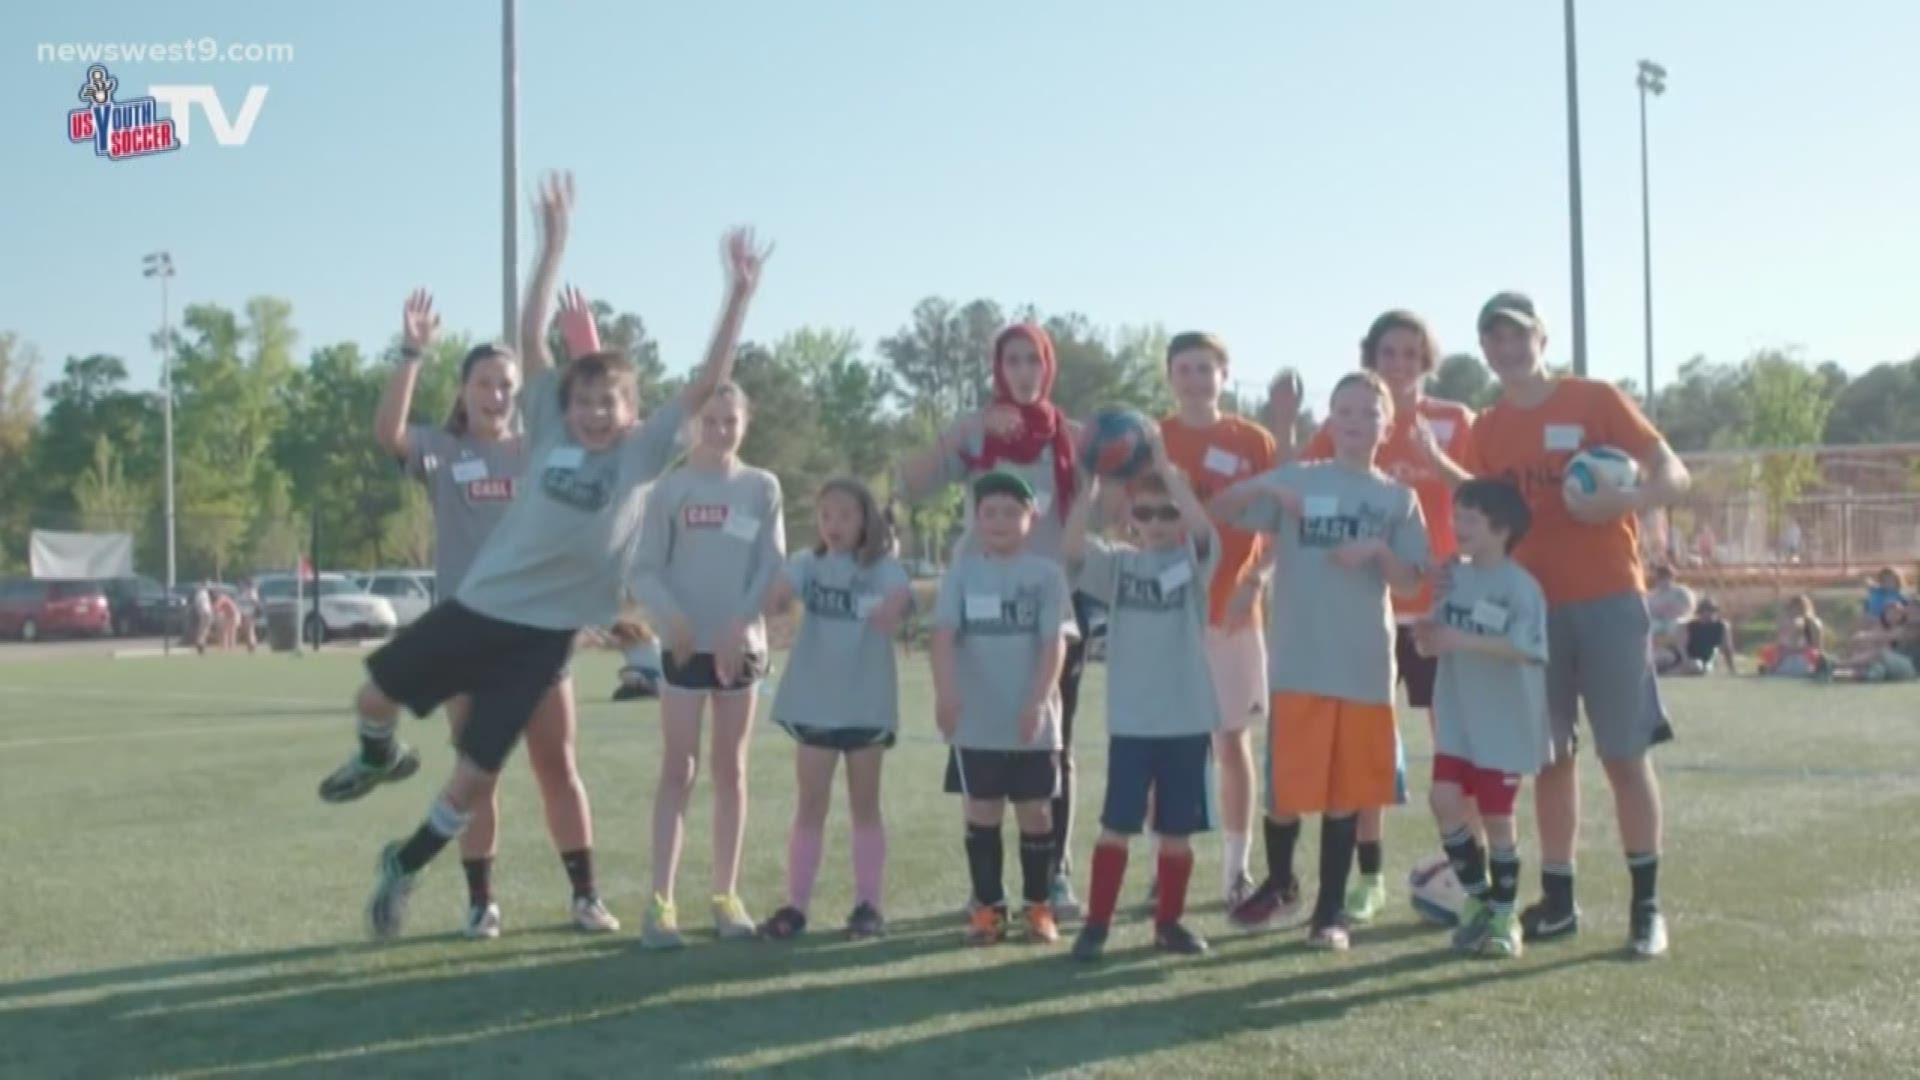 The youth soccer league is designed for kids with special needs.